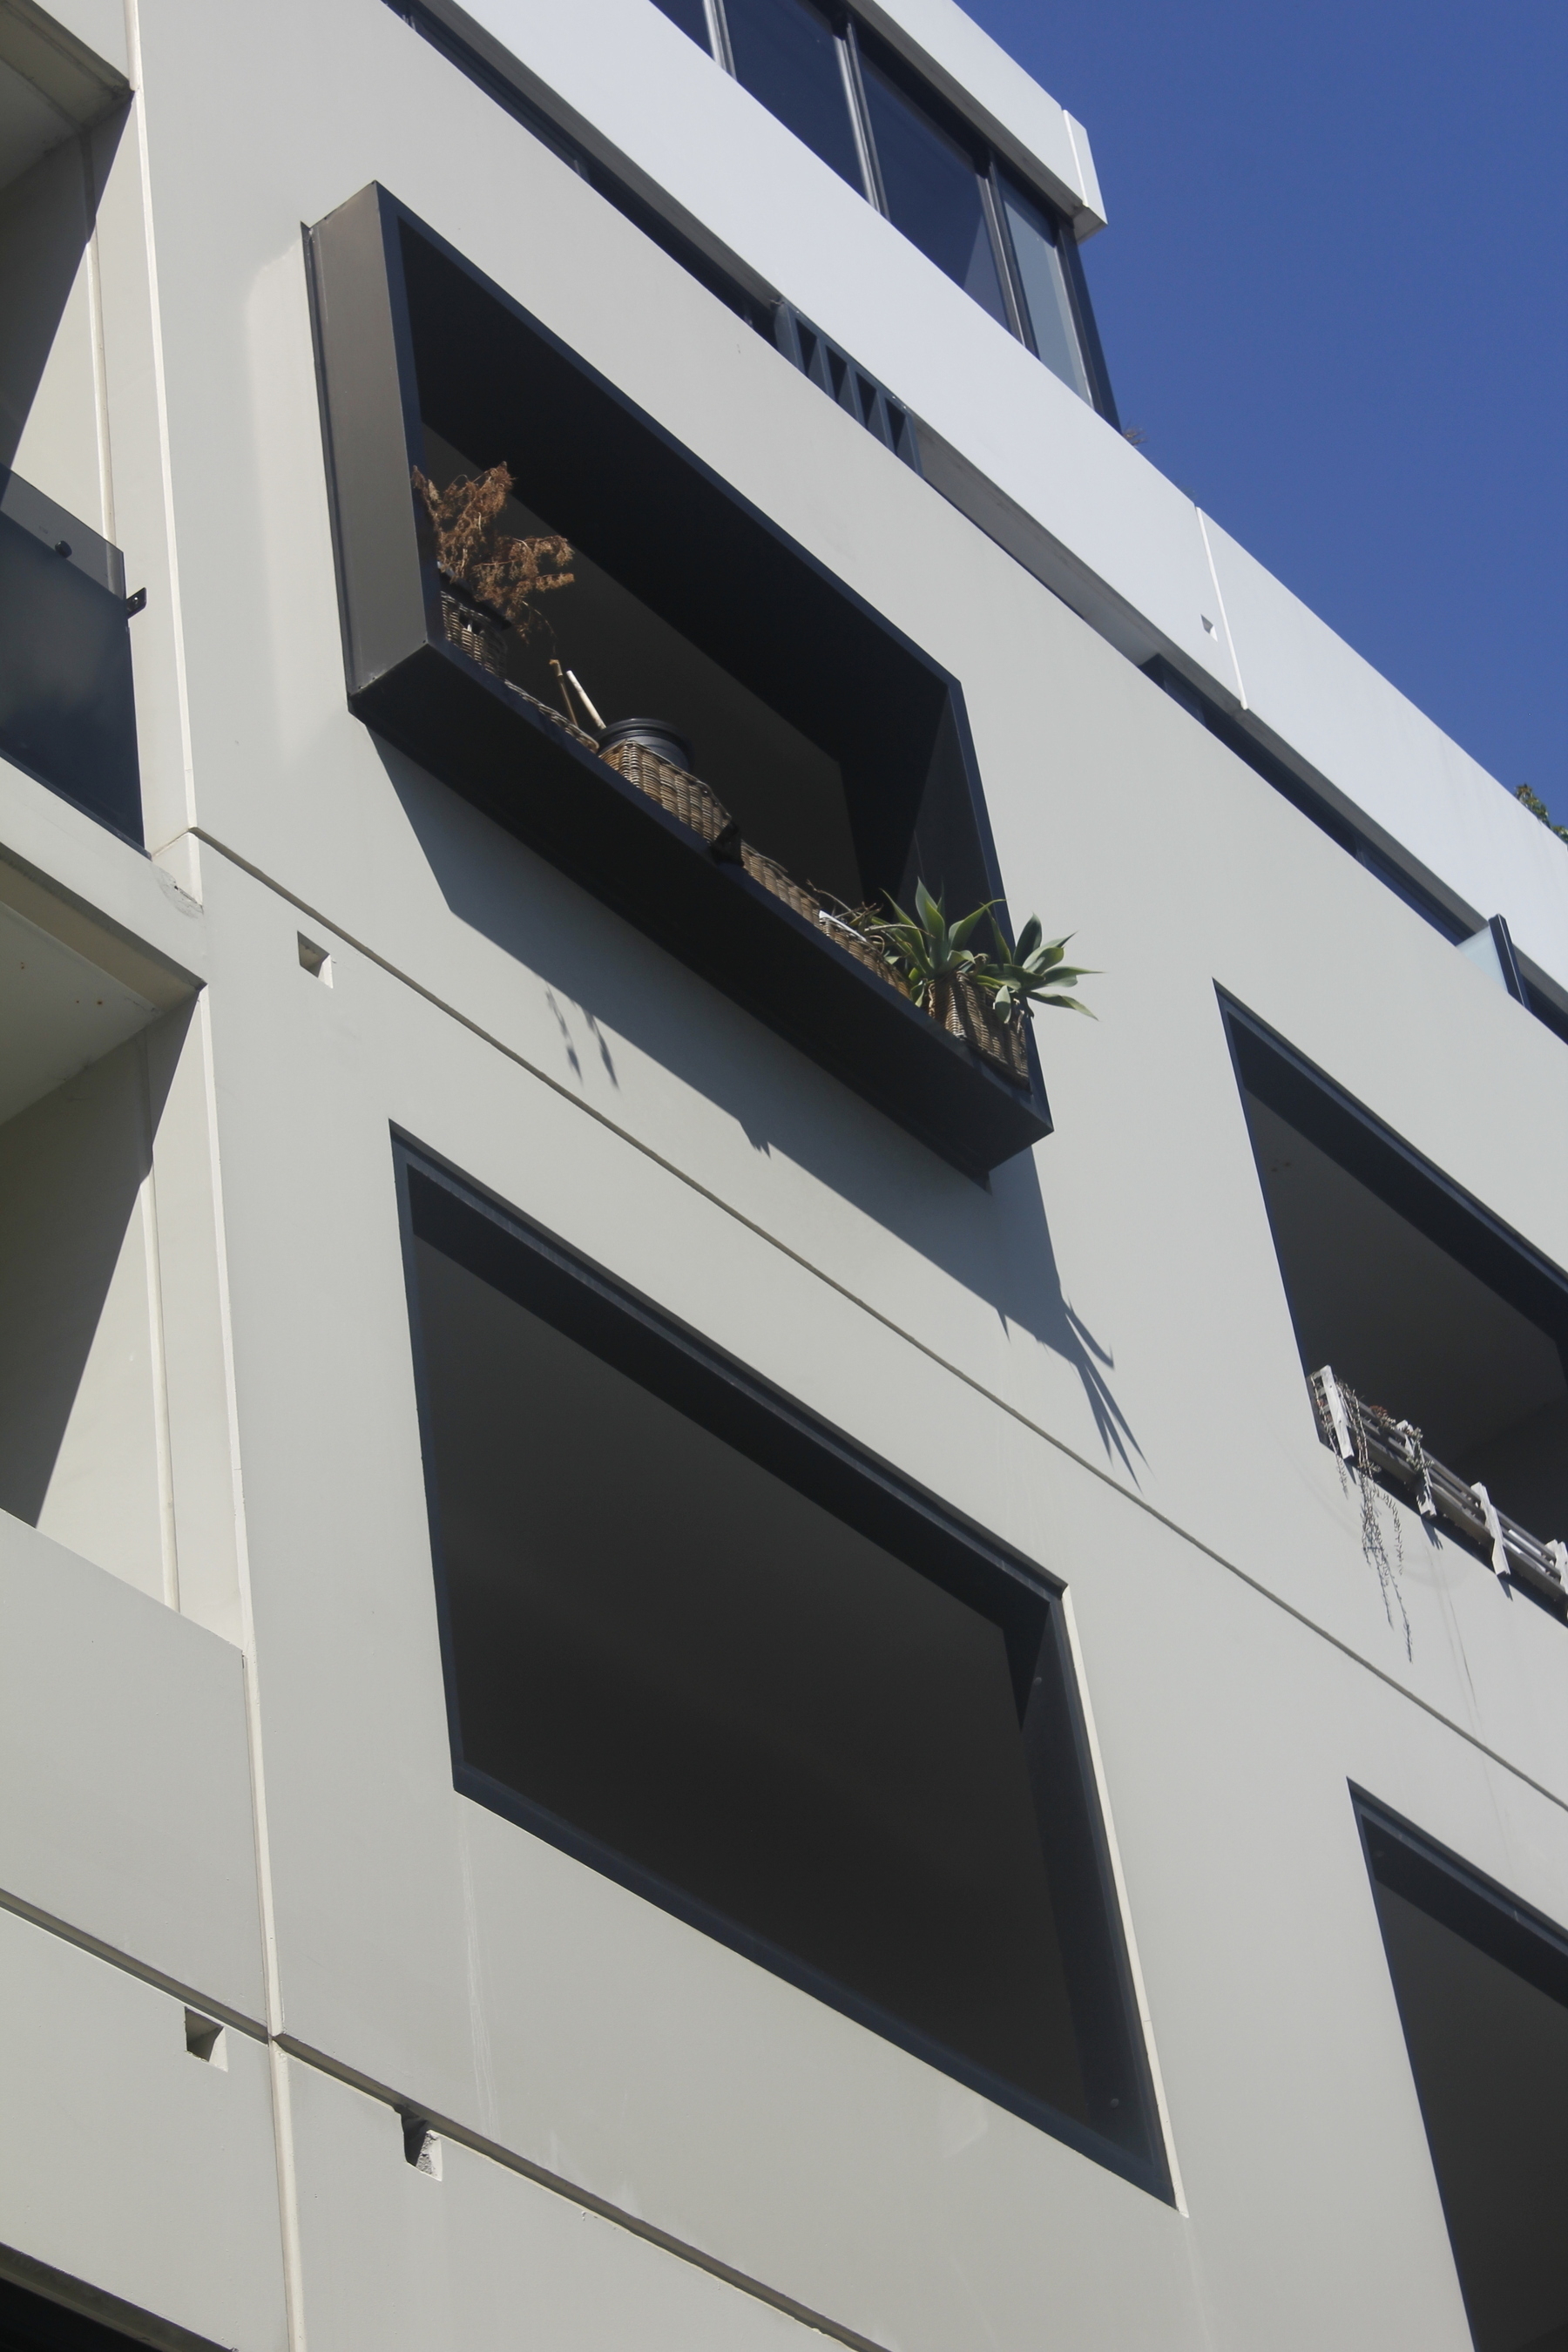 High up in the sunlit white facade of a high-rise building, a big window is boxed with a black timber surround that protrudes from the wall. Several baskets sit on the base of this surround. In a basket at one end, succulent plants are green and thriving. In a basket at the other end, a dead plant displays brown, drooping branches.